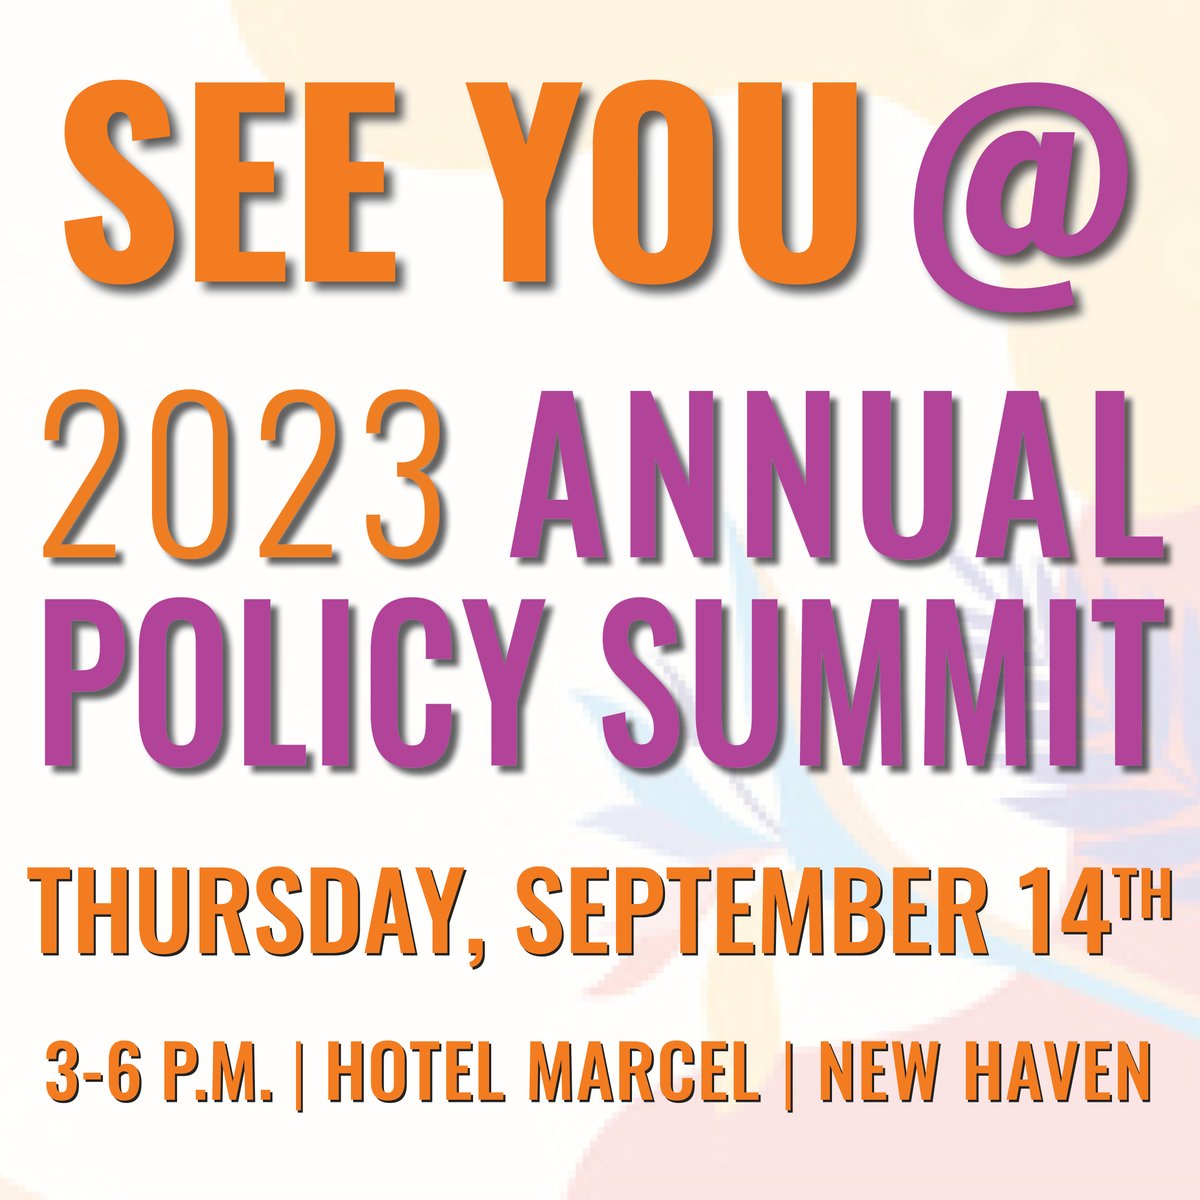 Don't miss out on the 2023 Policy Summit happening on September 14th at 3PM! This is your chance to be part of the conversation that can shape our future. Let's come together for a better tomorrow!
Register here: hubs.li/Q021F2rs0
#PolicySummit2023 #ImpactfulChange #gnhcc